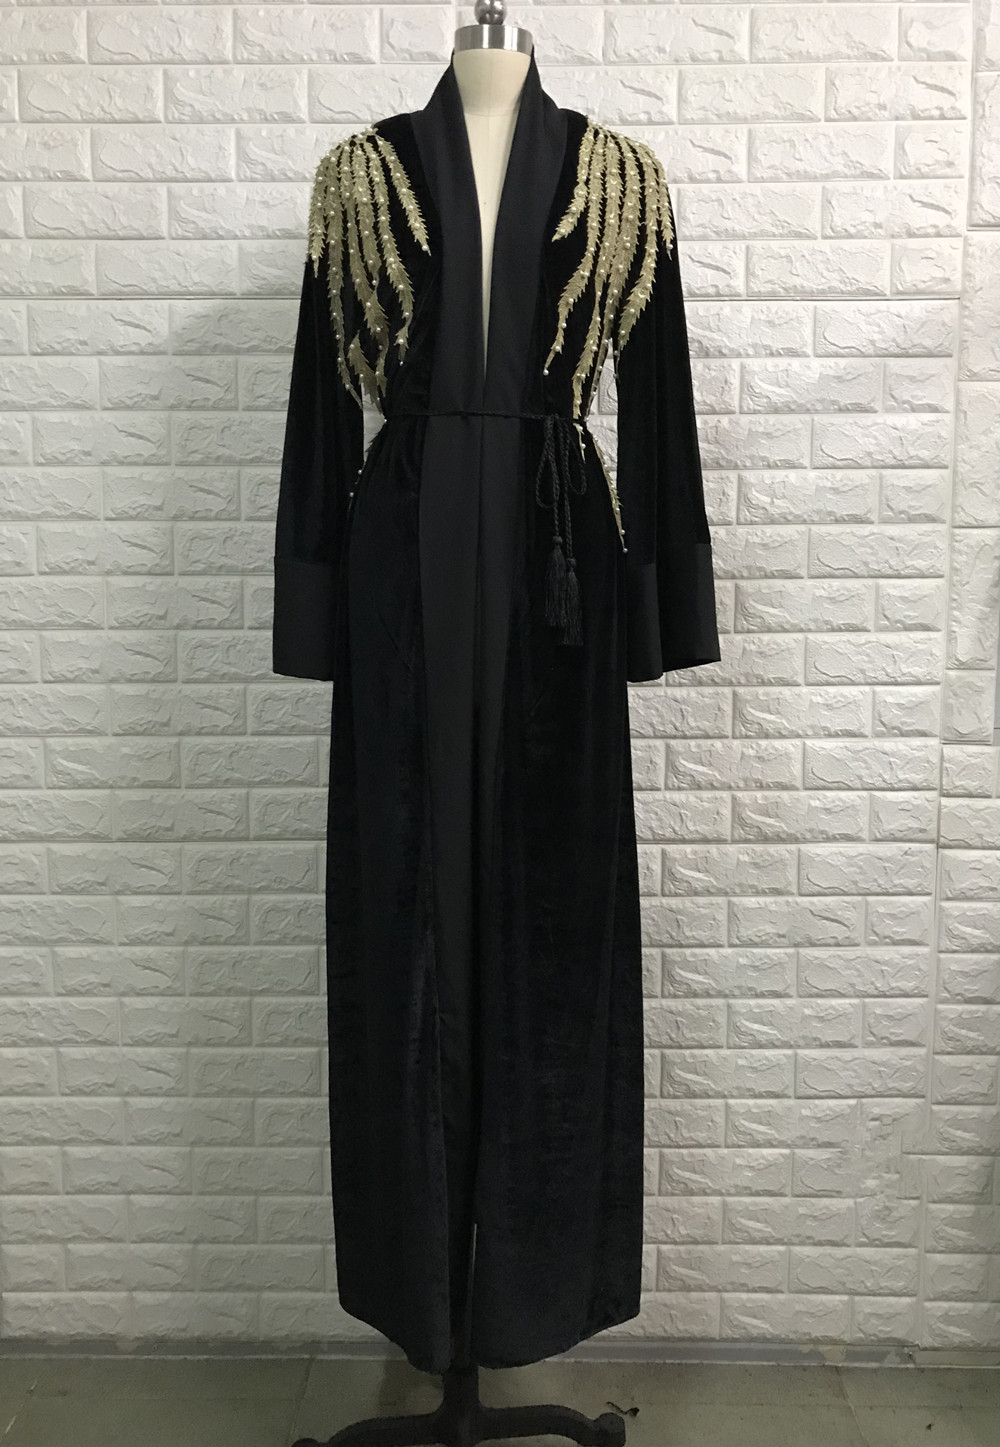 new arrival high quality velvet contrast color open abaya Islamic plus size muslim woman abaya wholesale